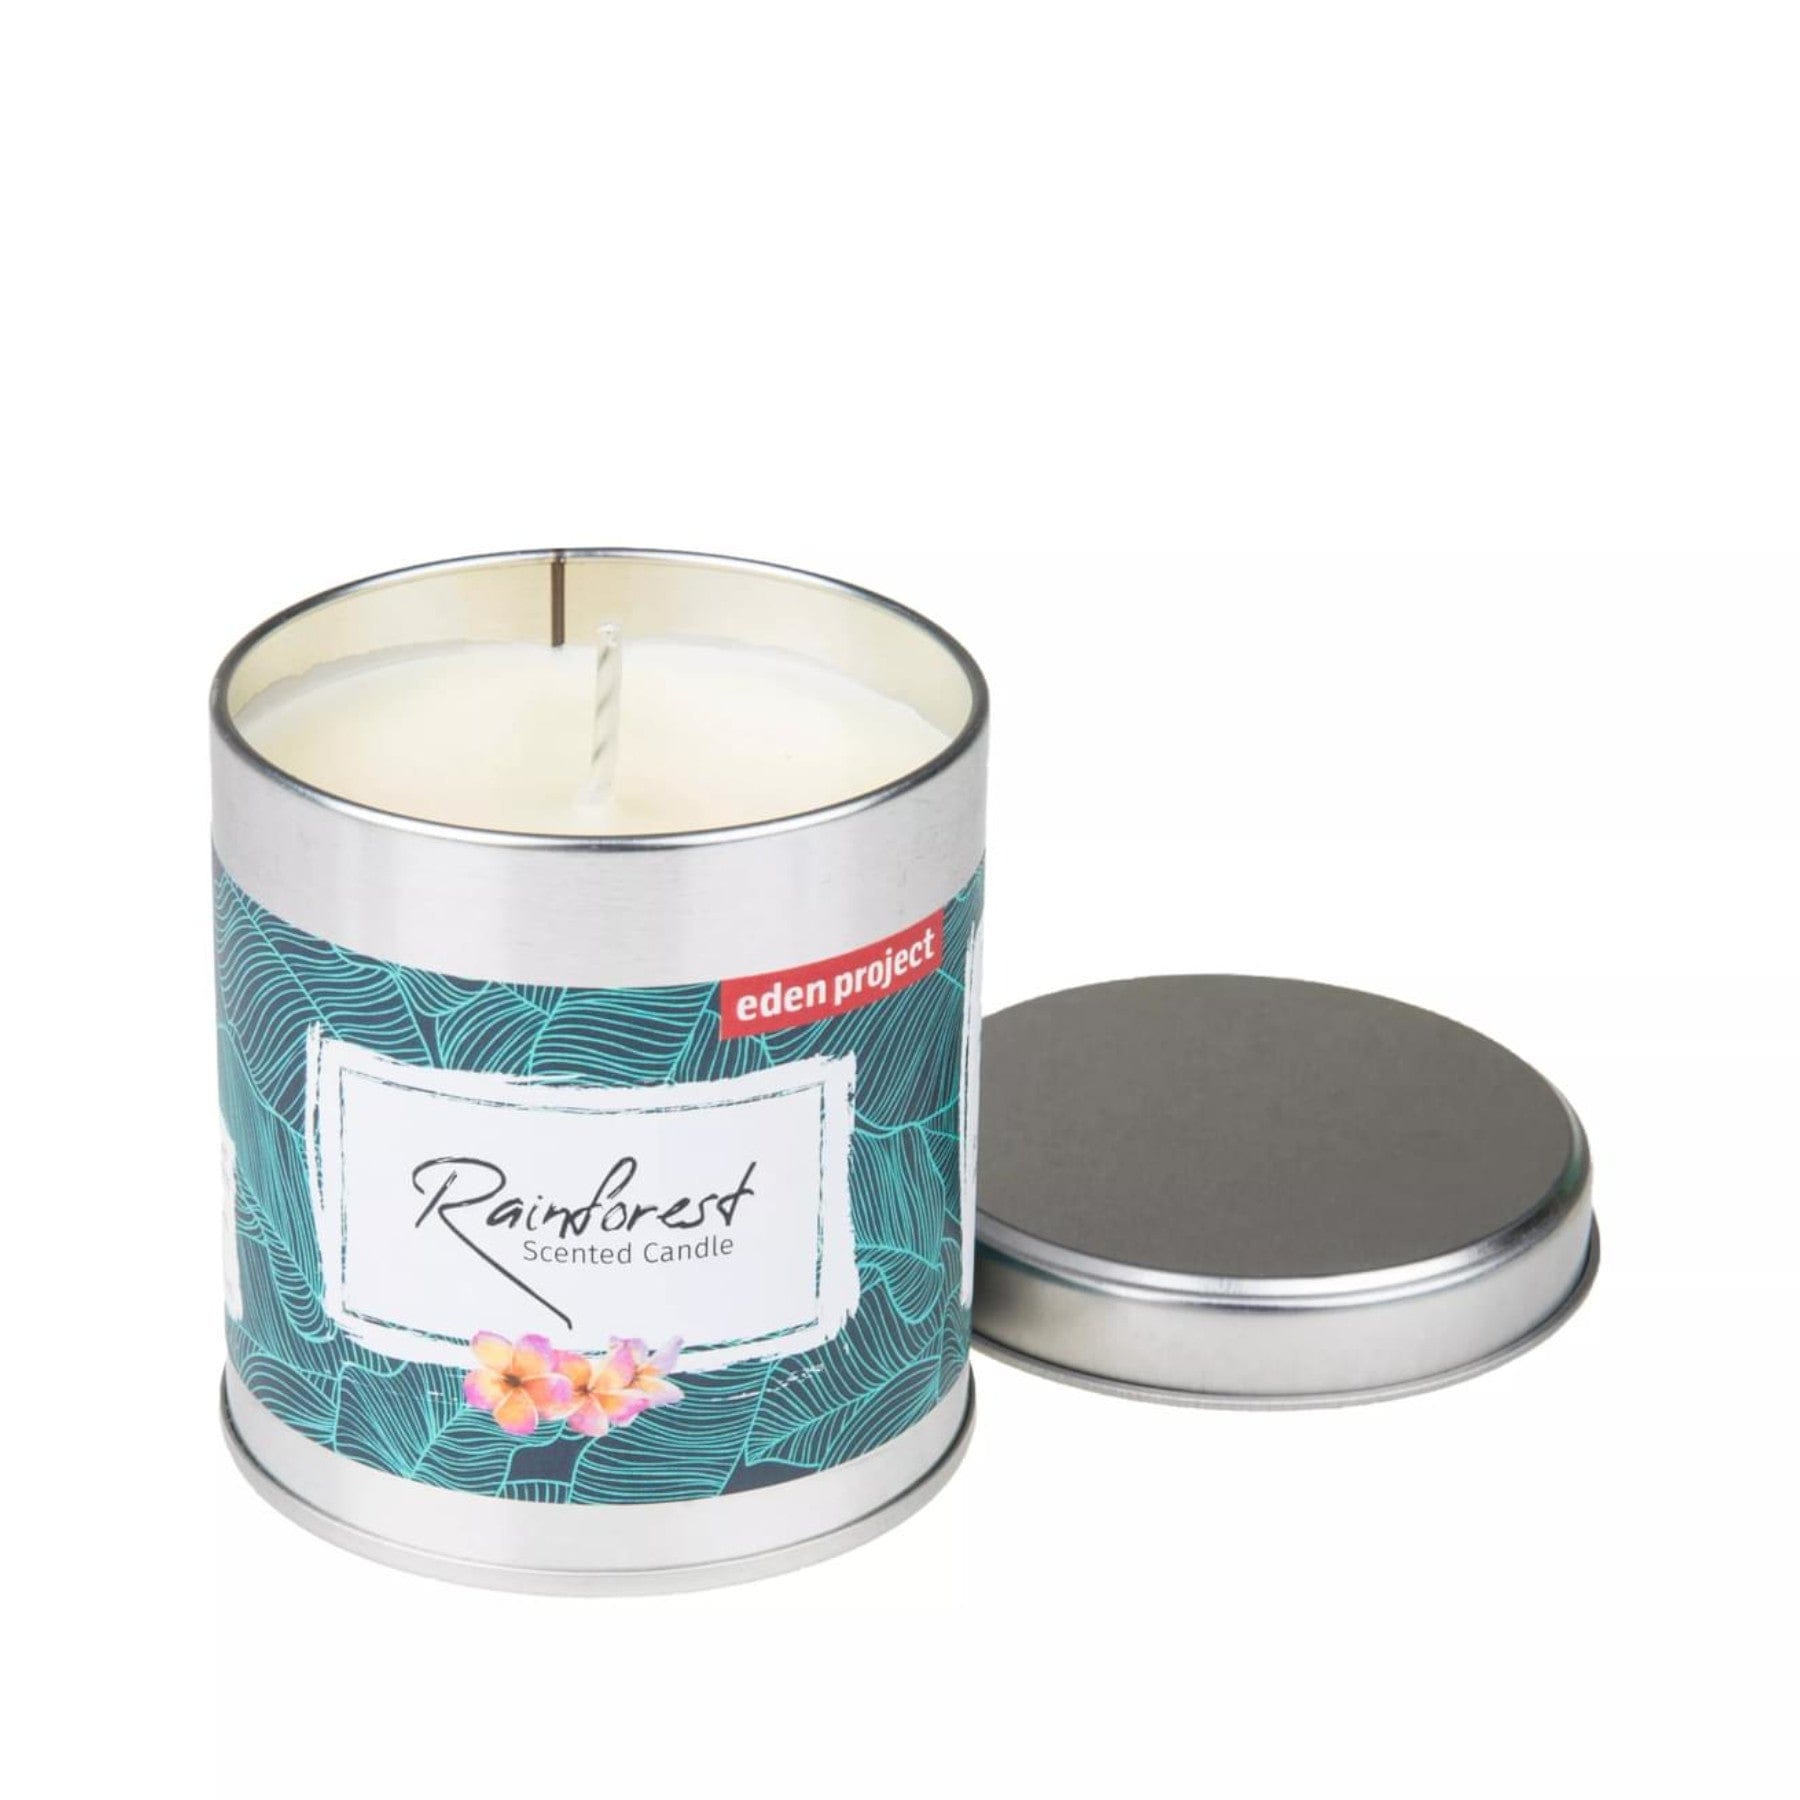 Eden Project Rainforest scented candle in a tin with a decorative tropical leaf pattern and detached lid, on a white background